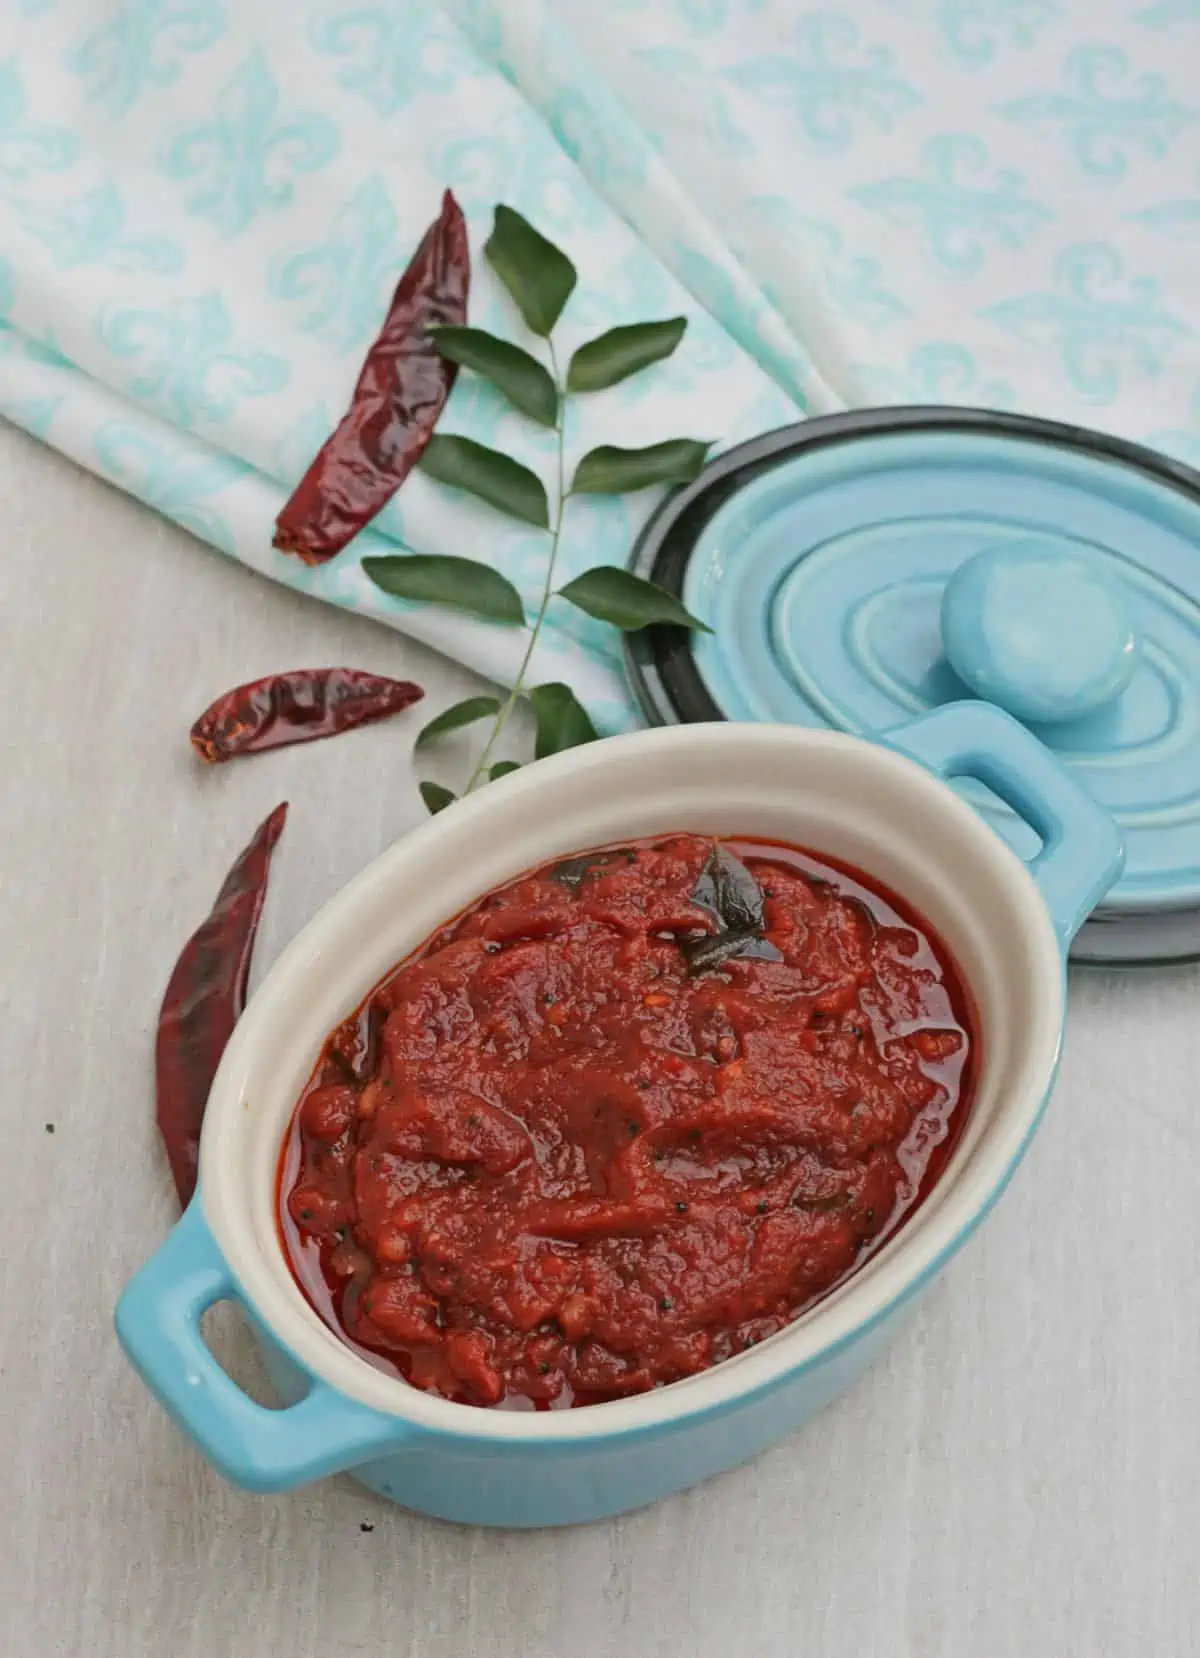 kara chutney in a bowl with red chilies and curry leaves in side